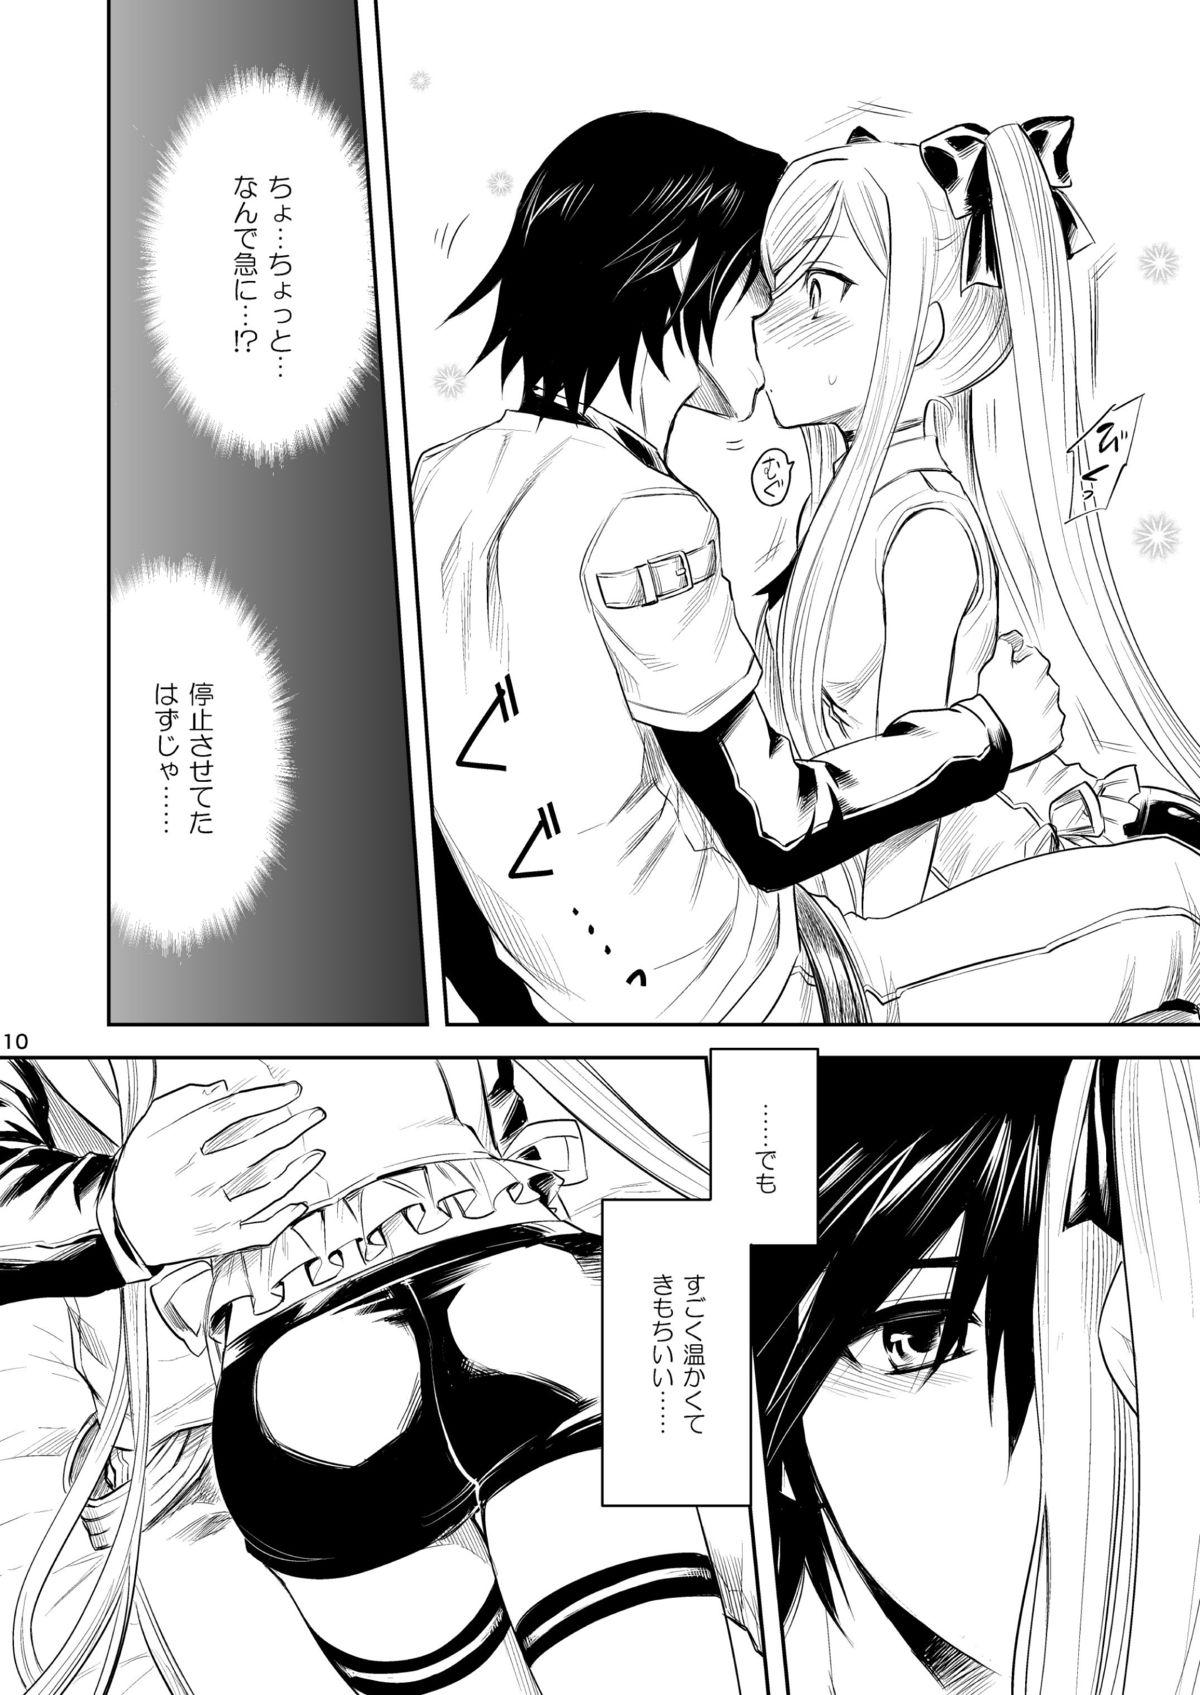 Sex Pussy Now Updating! - Arpeggio of blue steel Toilet - Page 9